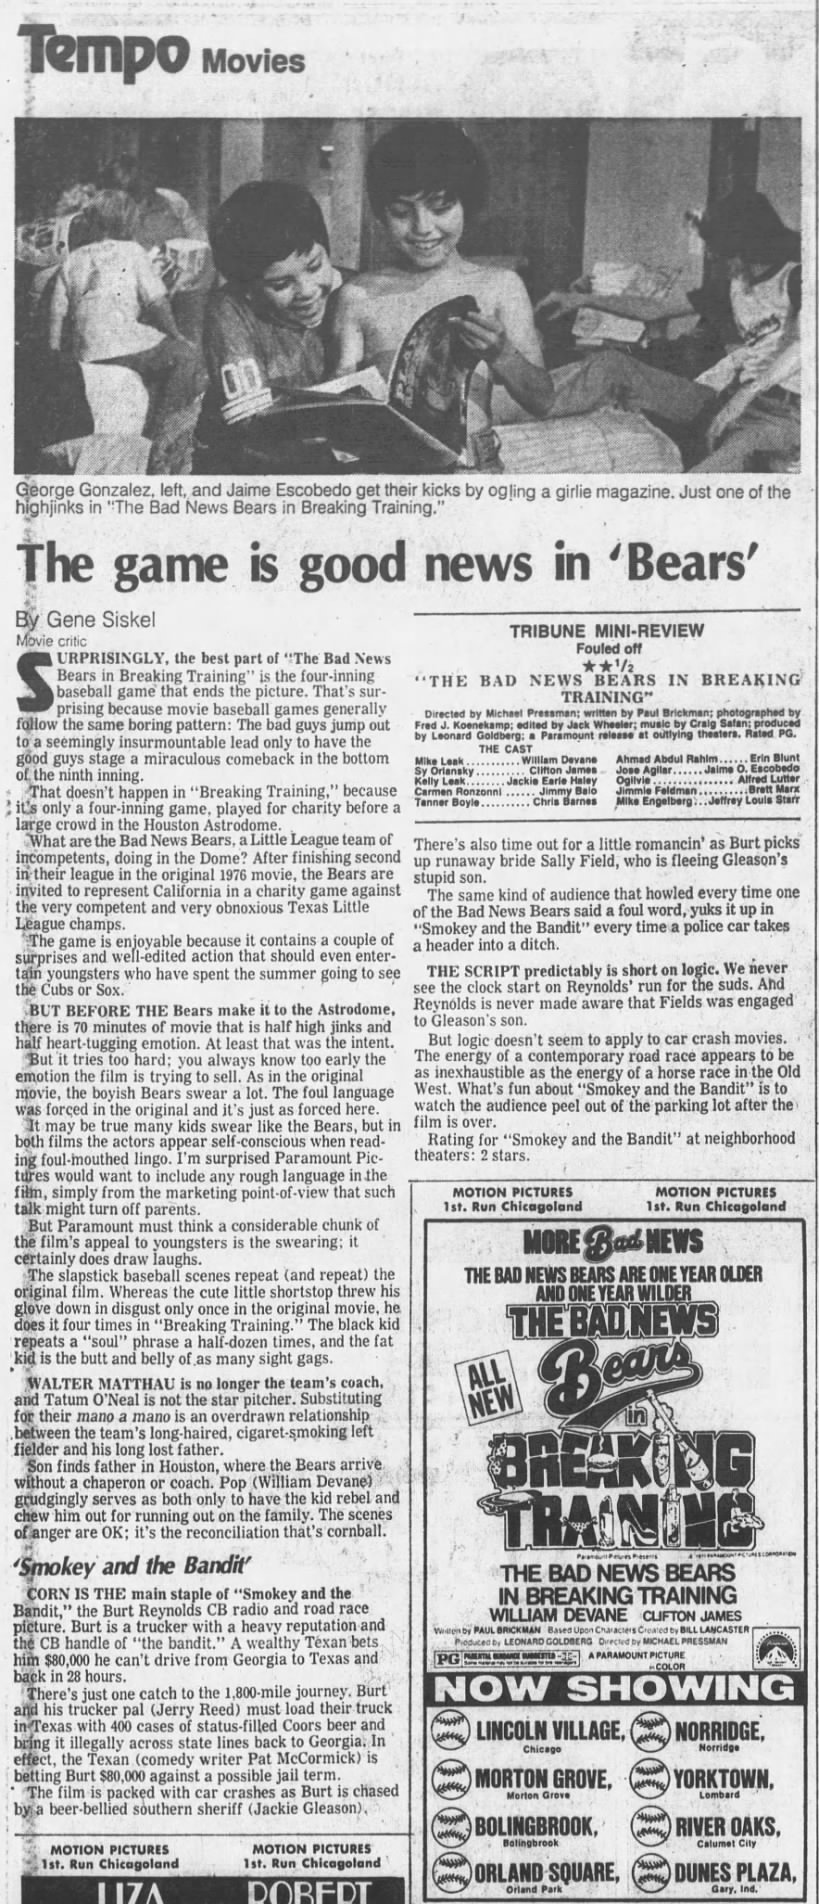 Gene Siskel Movie Reviews—THE BAD NEWS BEARS IN BREAKING TRAINING/SMOKEY AND THE BANDIT (08-04-77)